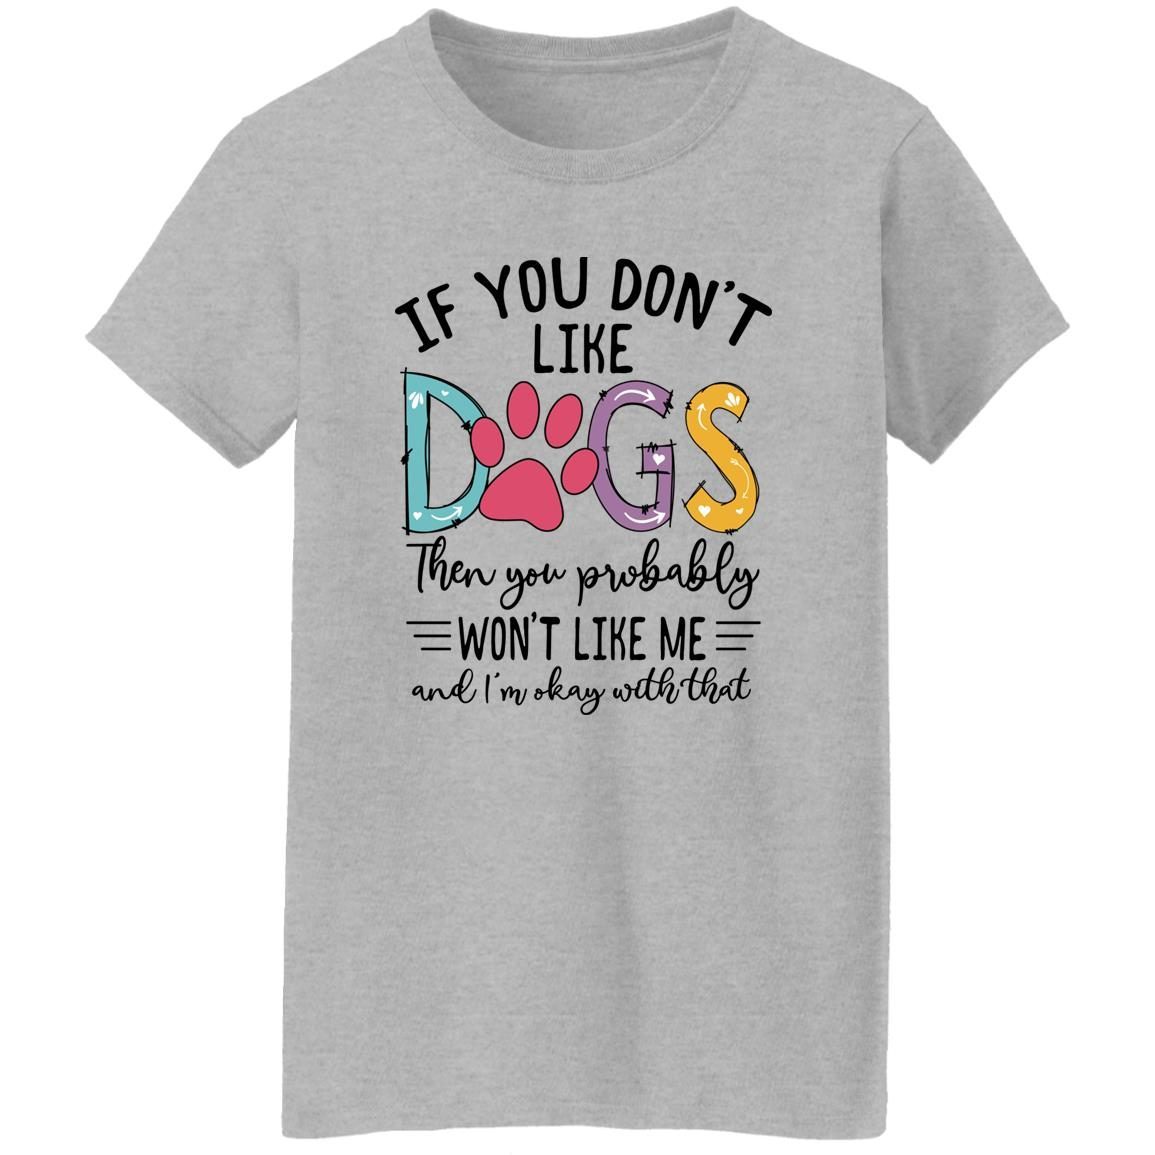 If You Don’t Like Dogs Then You Probably Won’t Like Me shirt 5